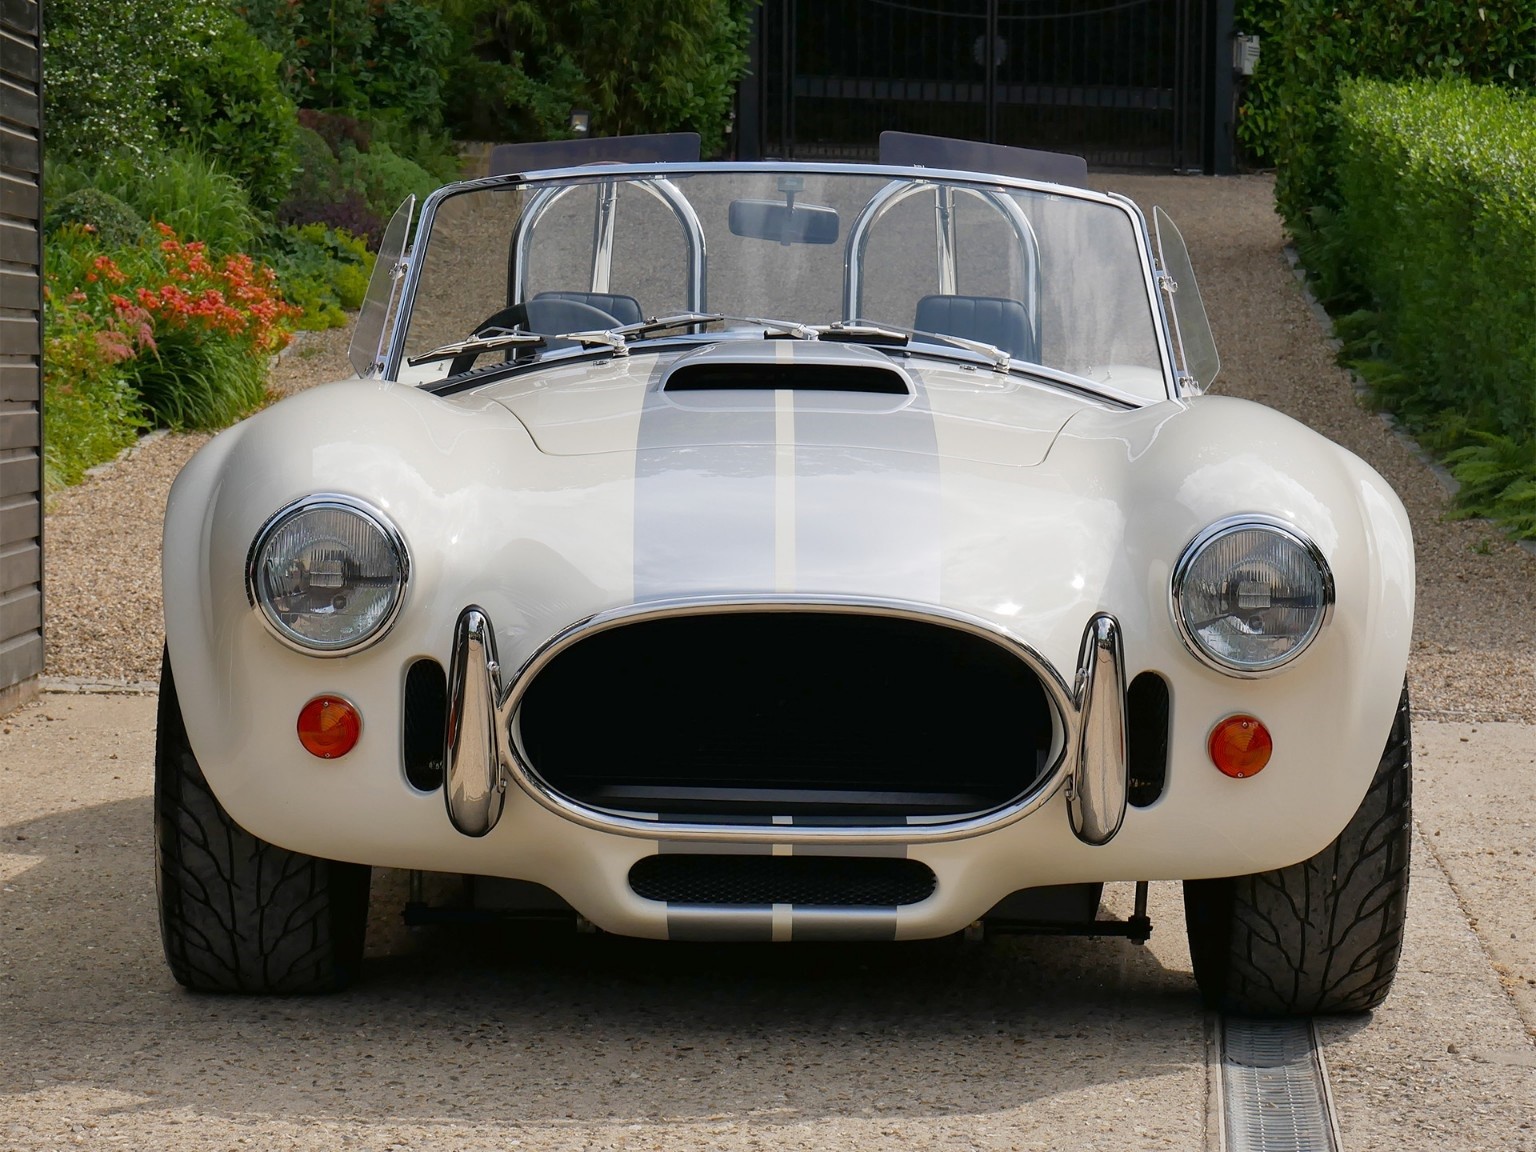 2020 AC Cobra Looks Like It Came Straight From the ‘60s - autoevolution